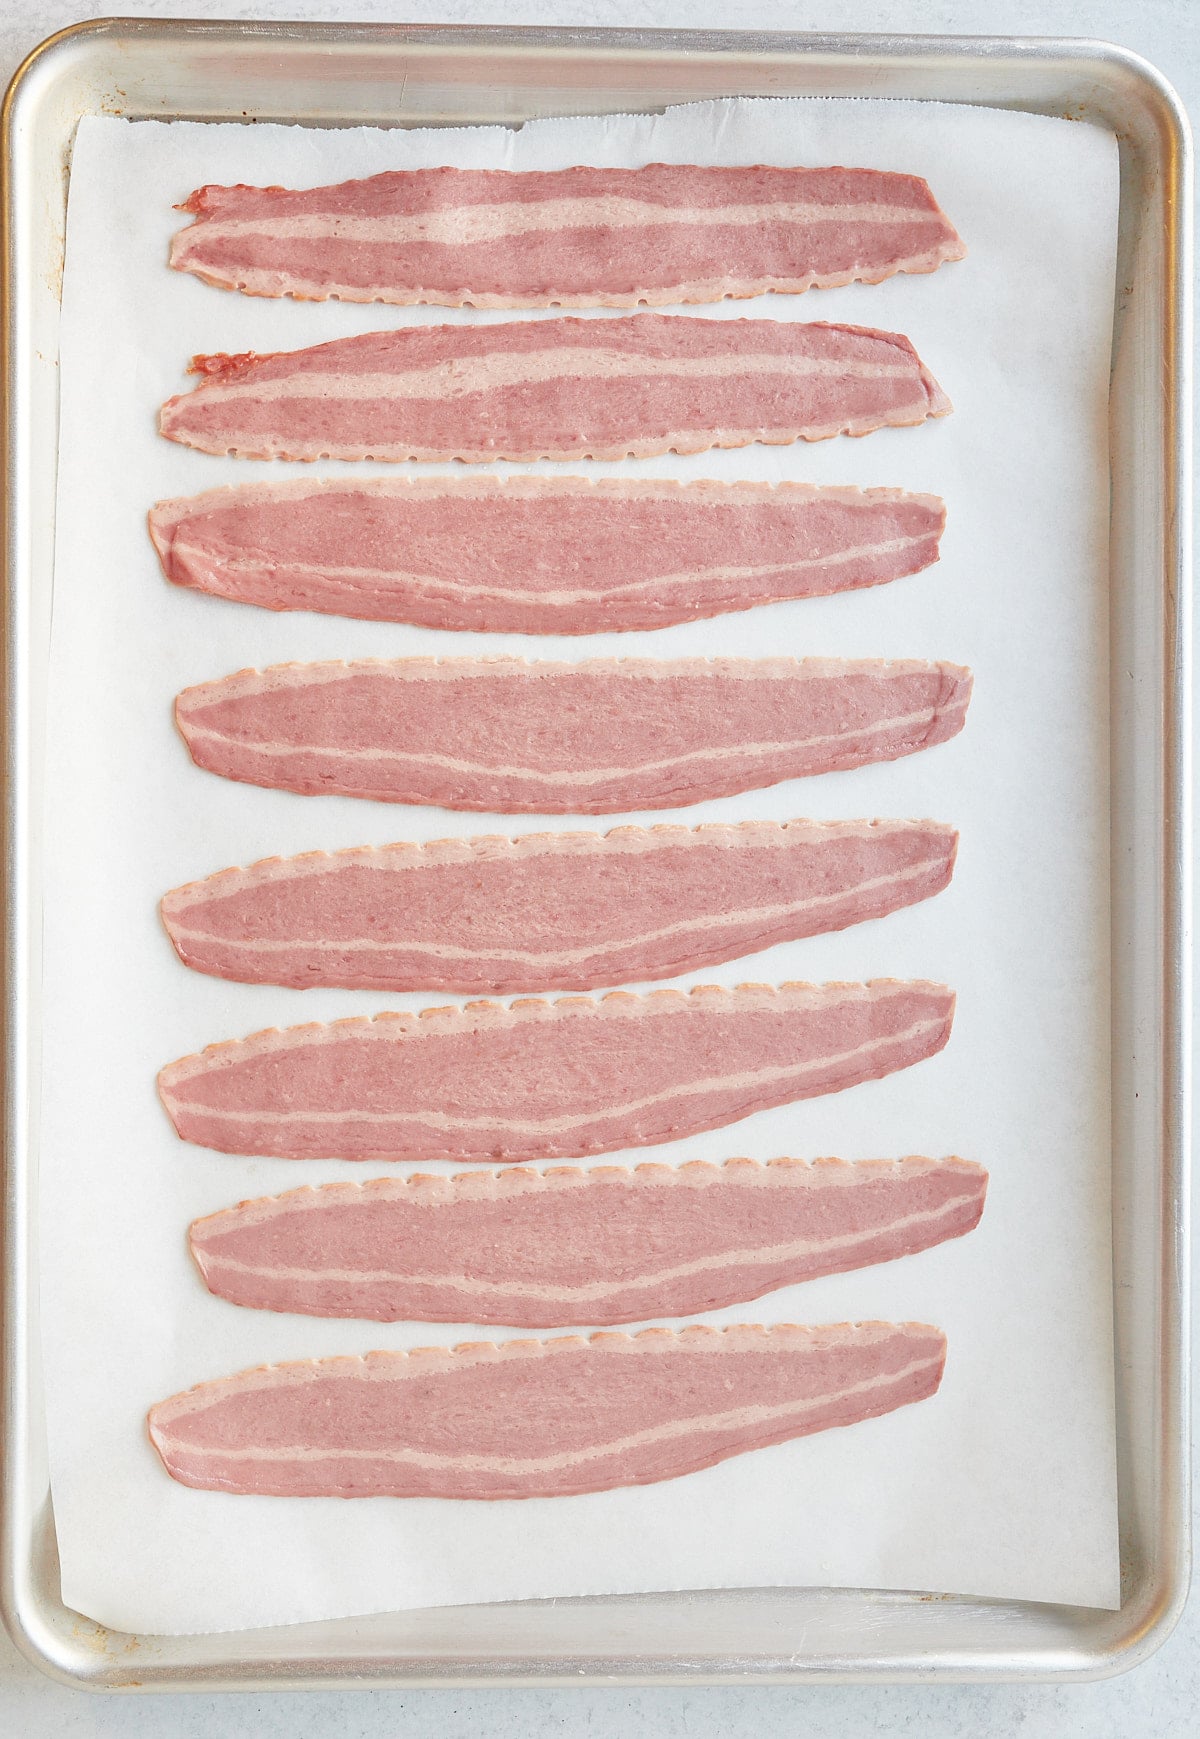 Strips of turkey bacon on a lined baking sheet before being cooked.